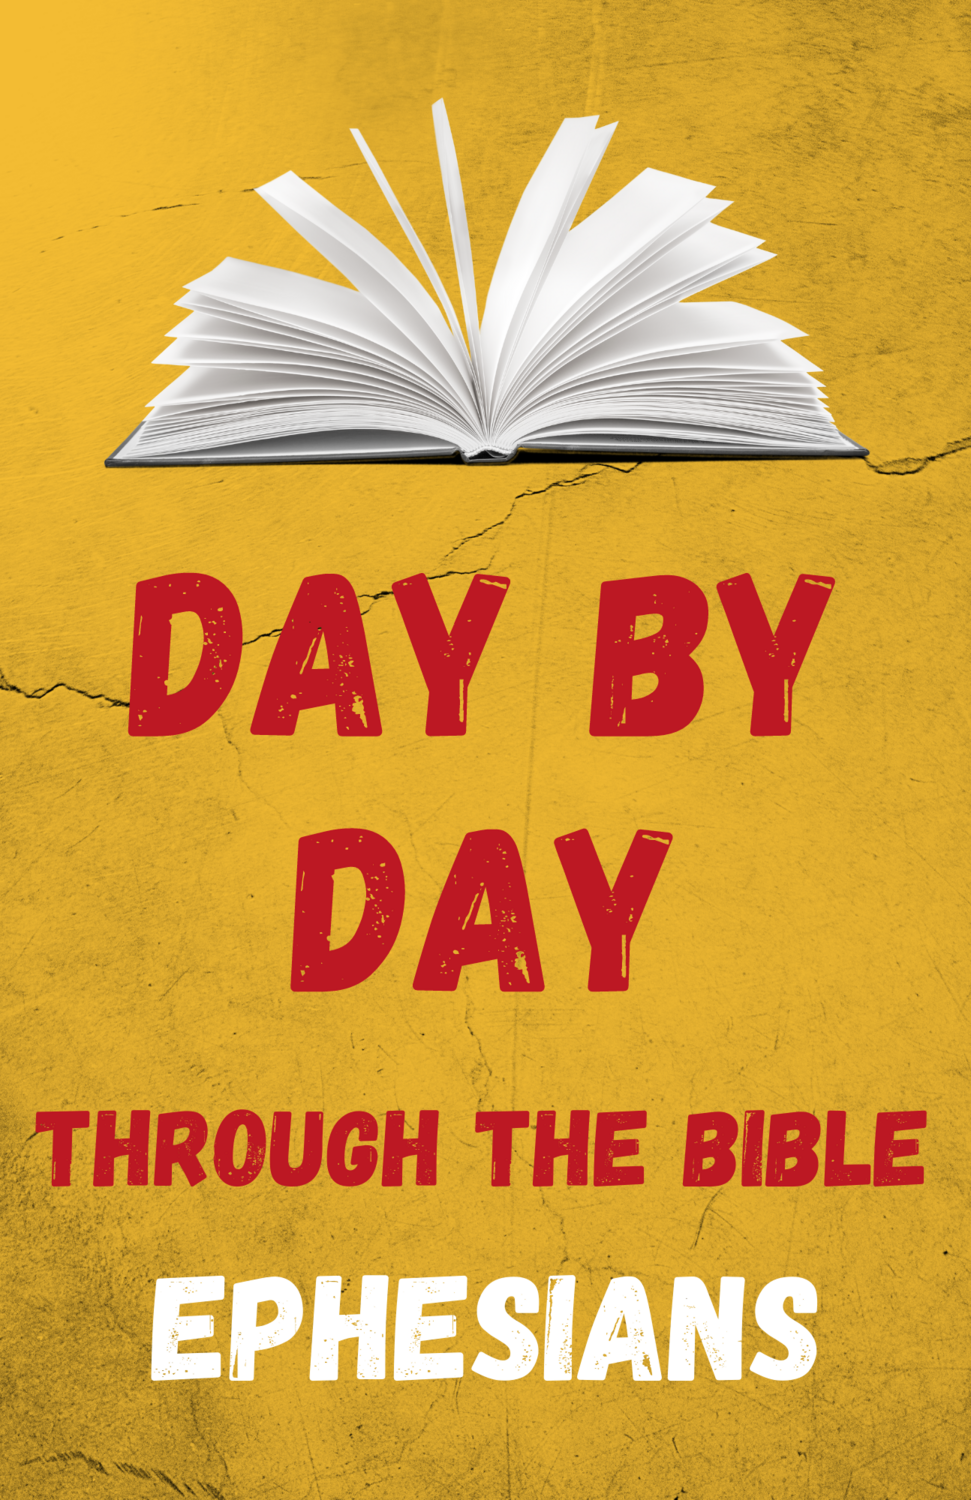 Day by Day Through the Bible:  Six Days in Ephesians - Digital Download